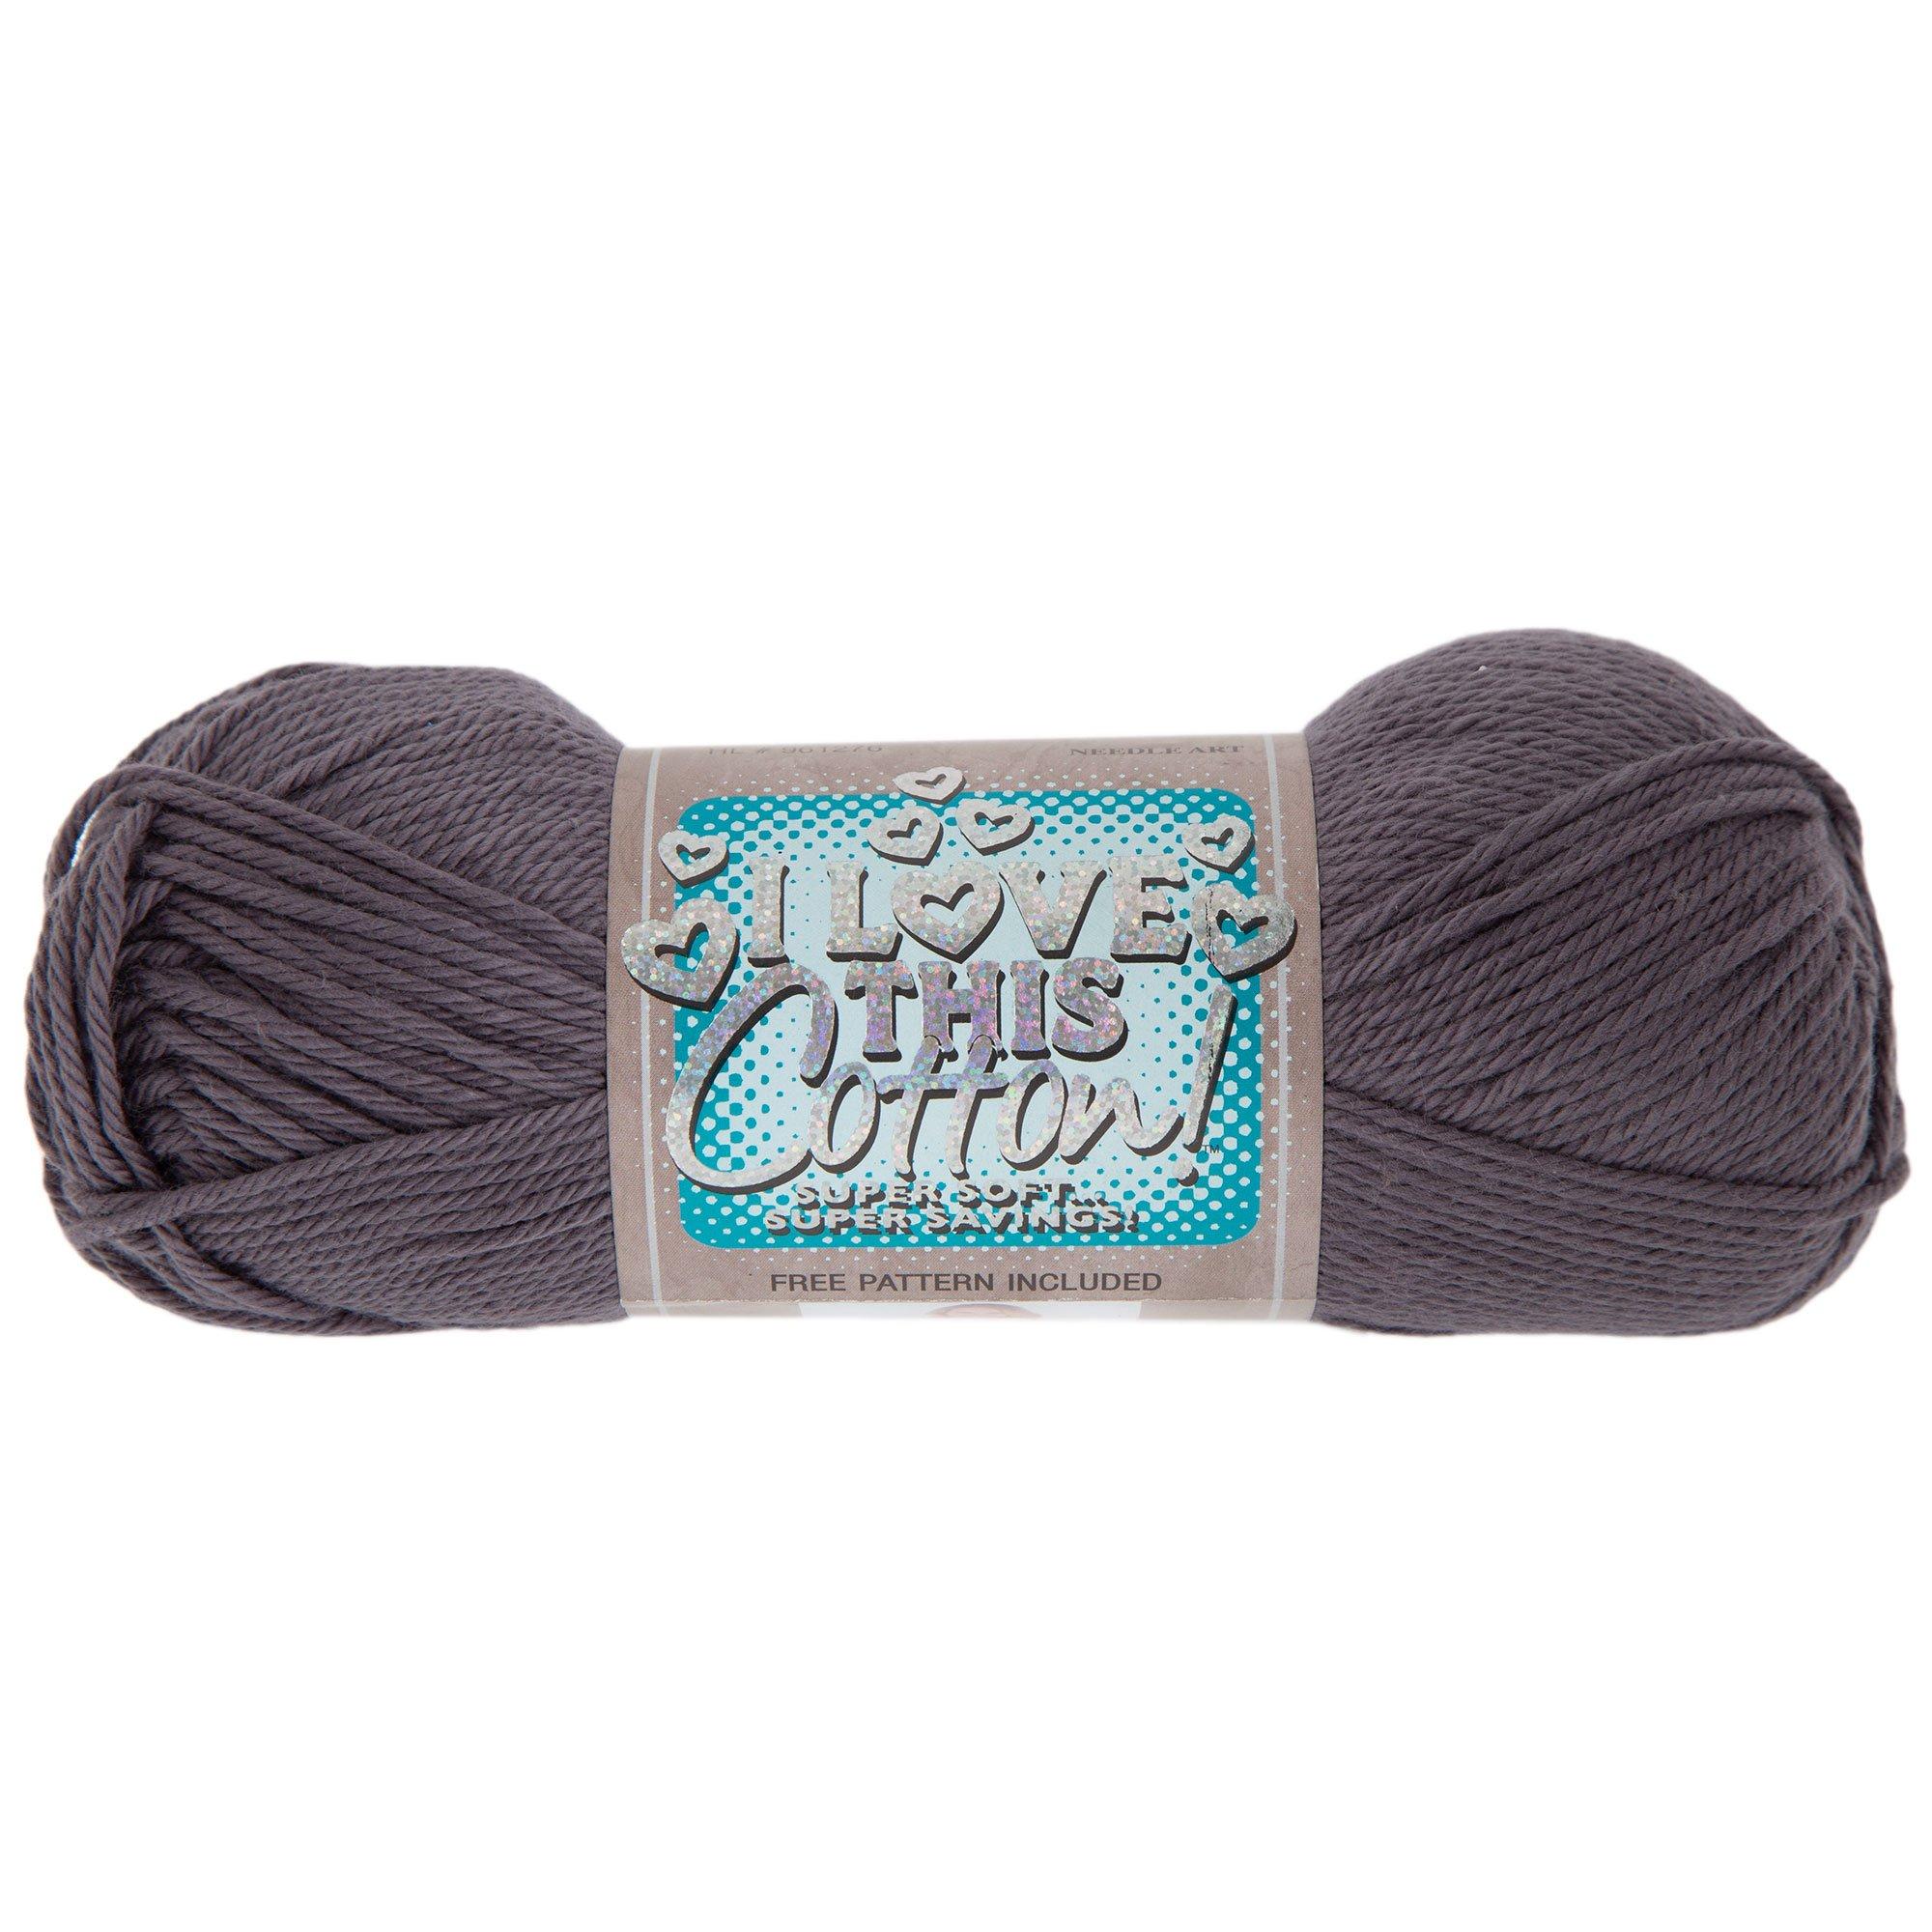 I Love This Cotton! French Lilac 3.5 oz